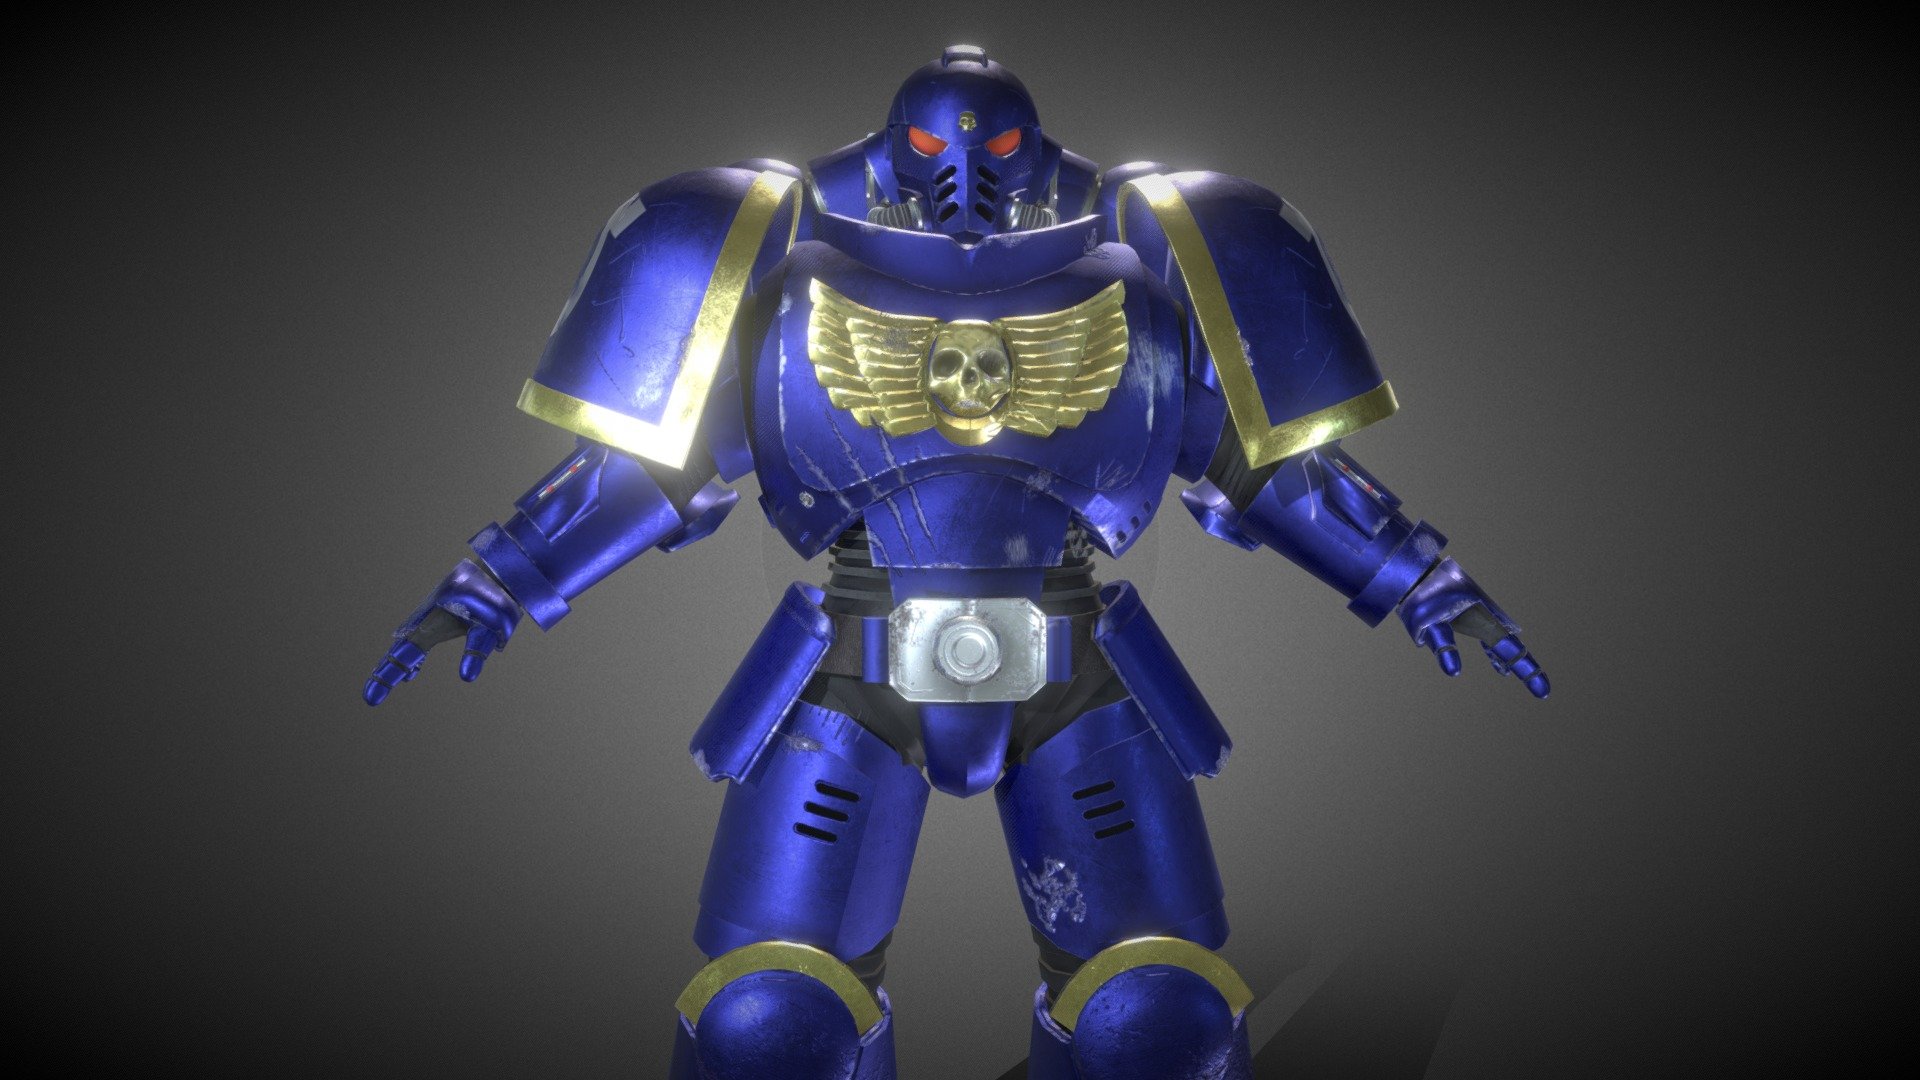 Game Ready Space Marine from Warhammer 40k franchise, ready to rig with high-quality textures 3d model